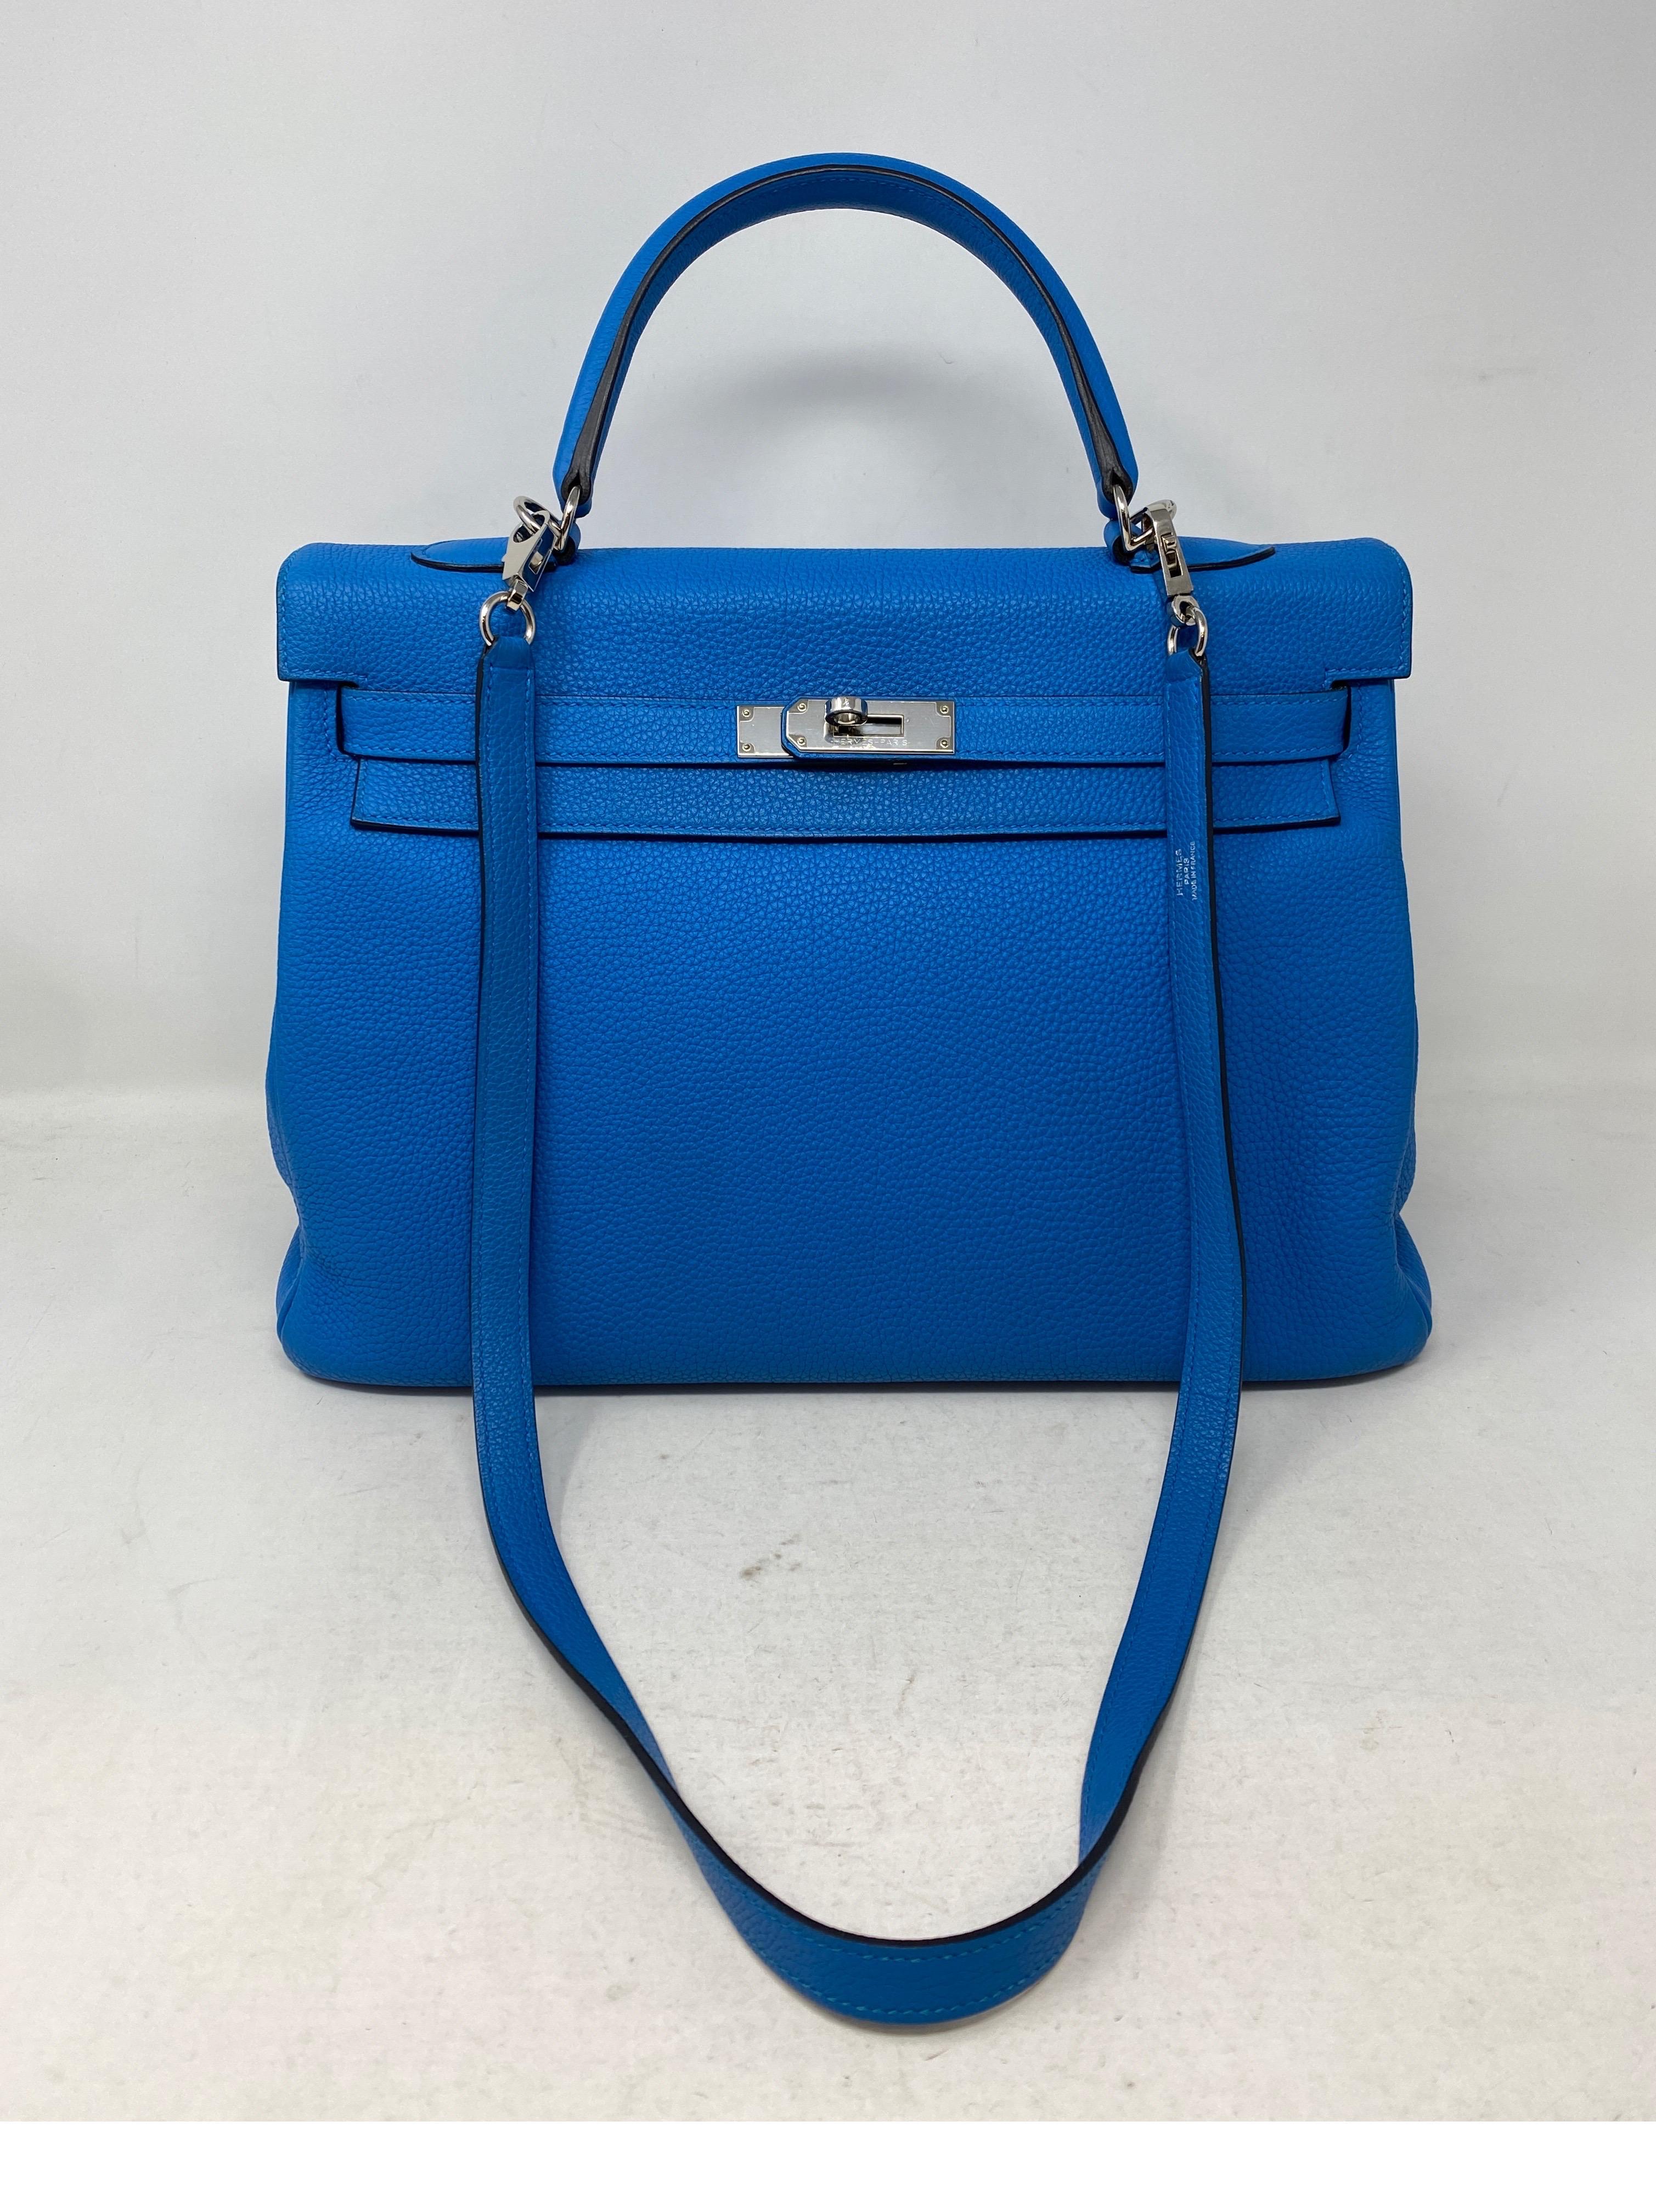 Hermes Kelly 35 Zanzibar Blue Bag. Palladium hardware. Excellent condition. Looks like new. From 2017. Includes original receipt and Bababebi authenticity certificate. Plastic still on hardware. Includes strap, clochette, lock, keys, and dust cover.